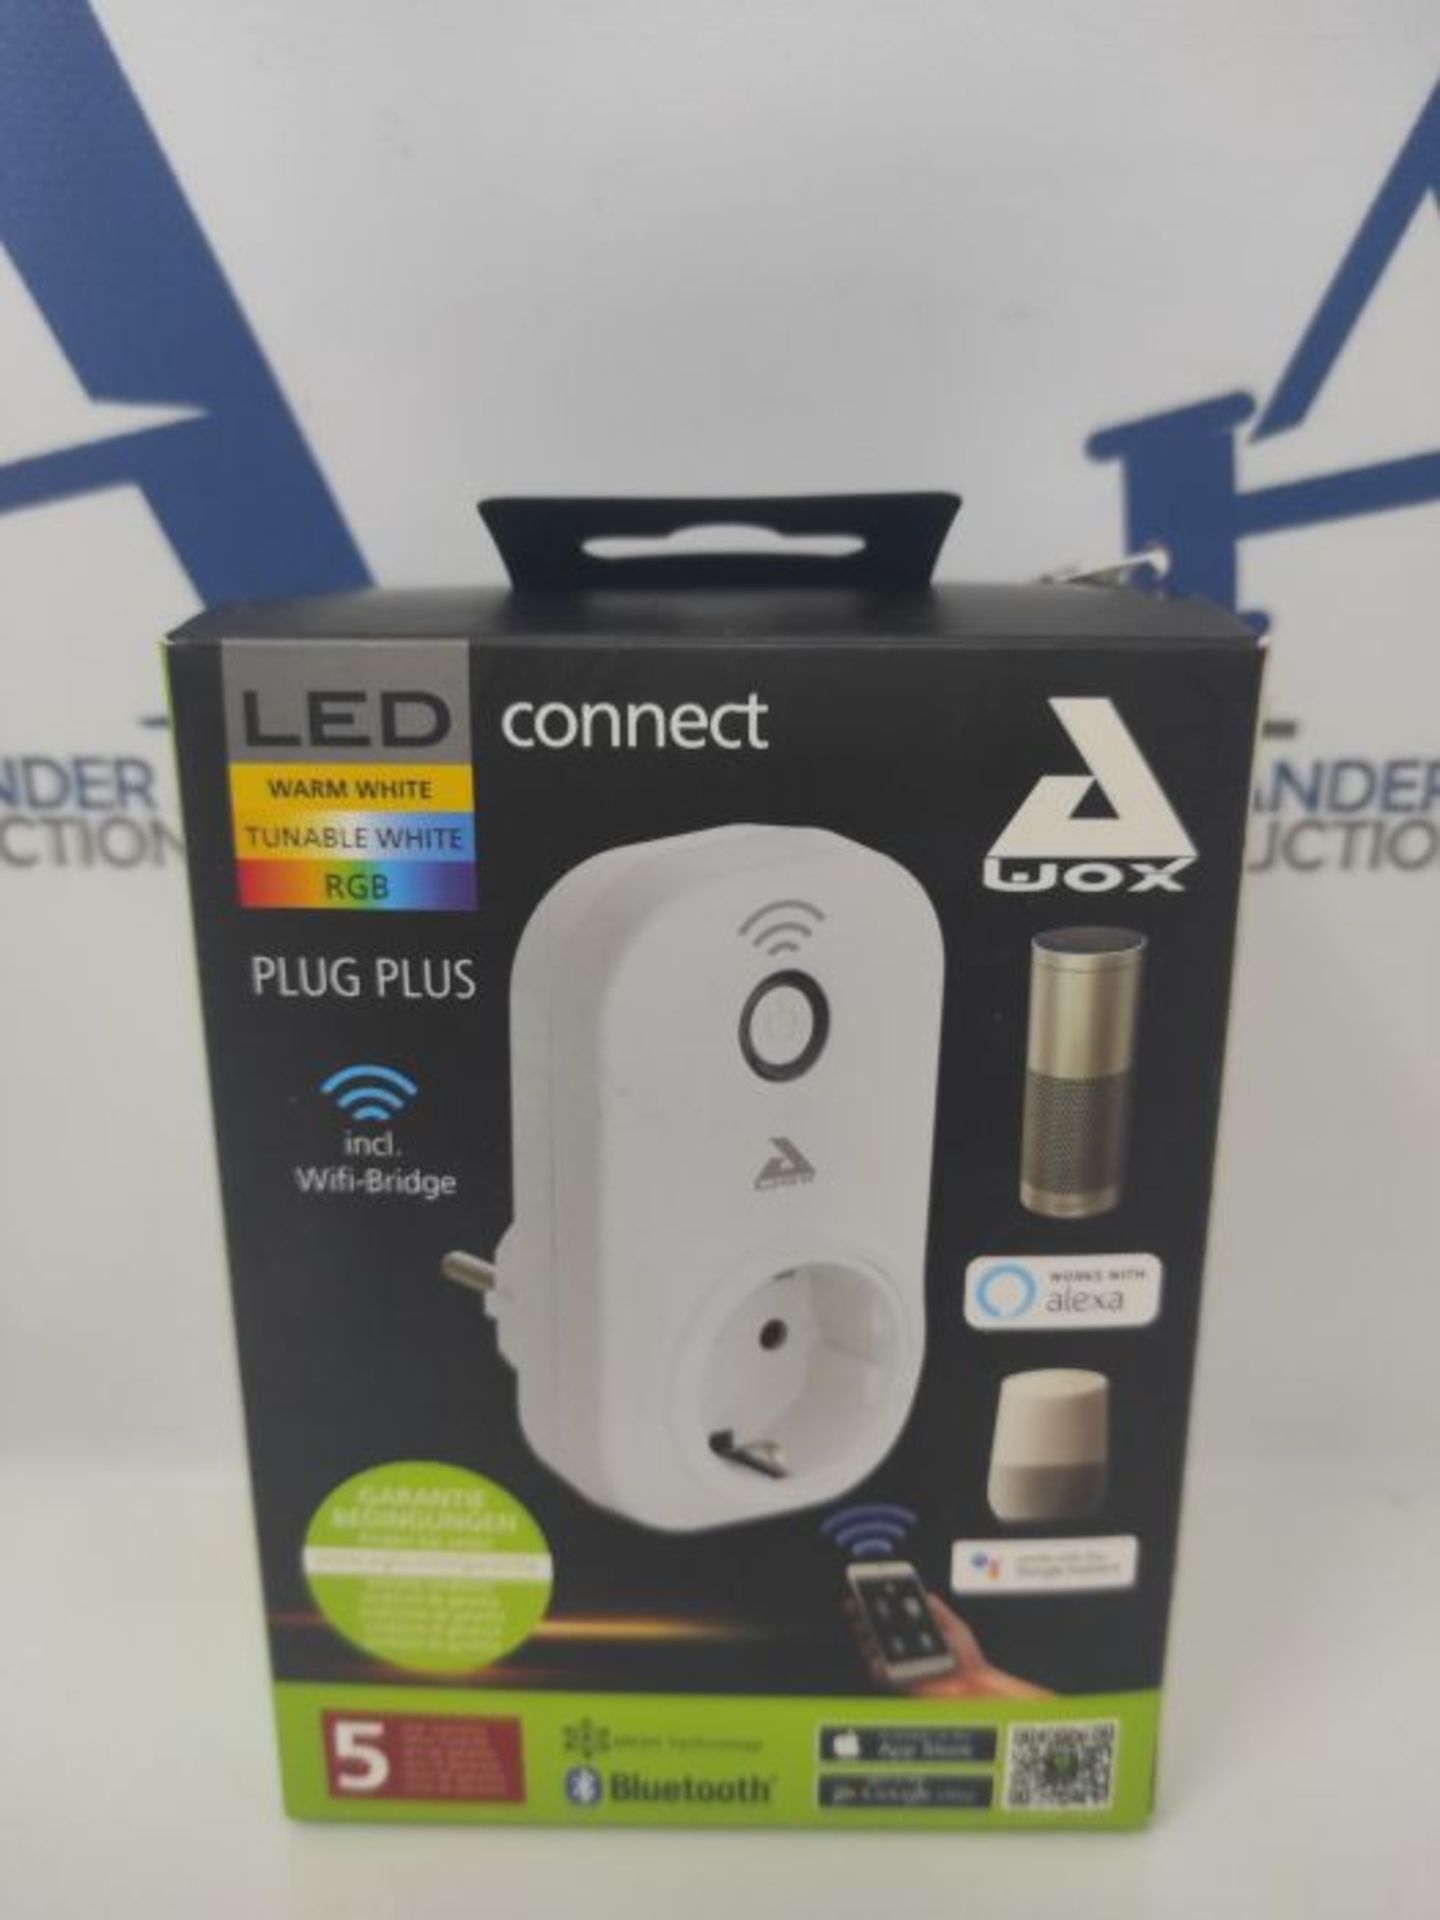 EGLO Connect Plug Plus Smart Home Plug for Voice Control, Socket with WLAN and Energy - Image 2 of 3